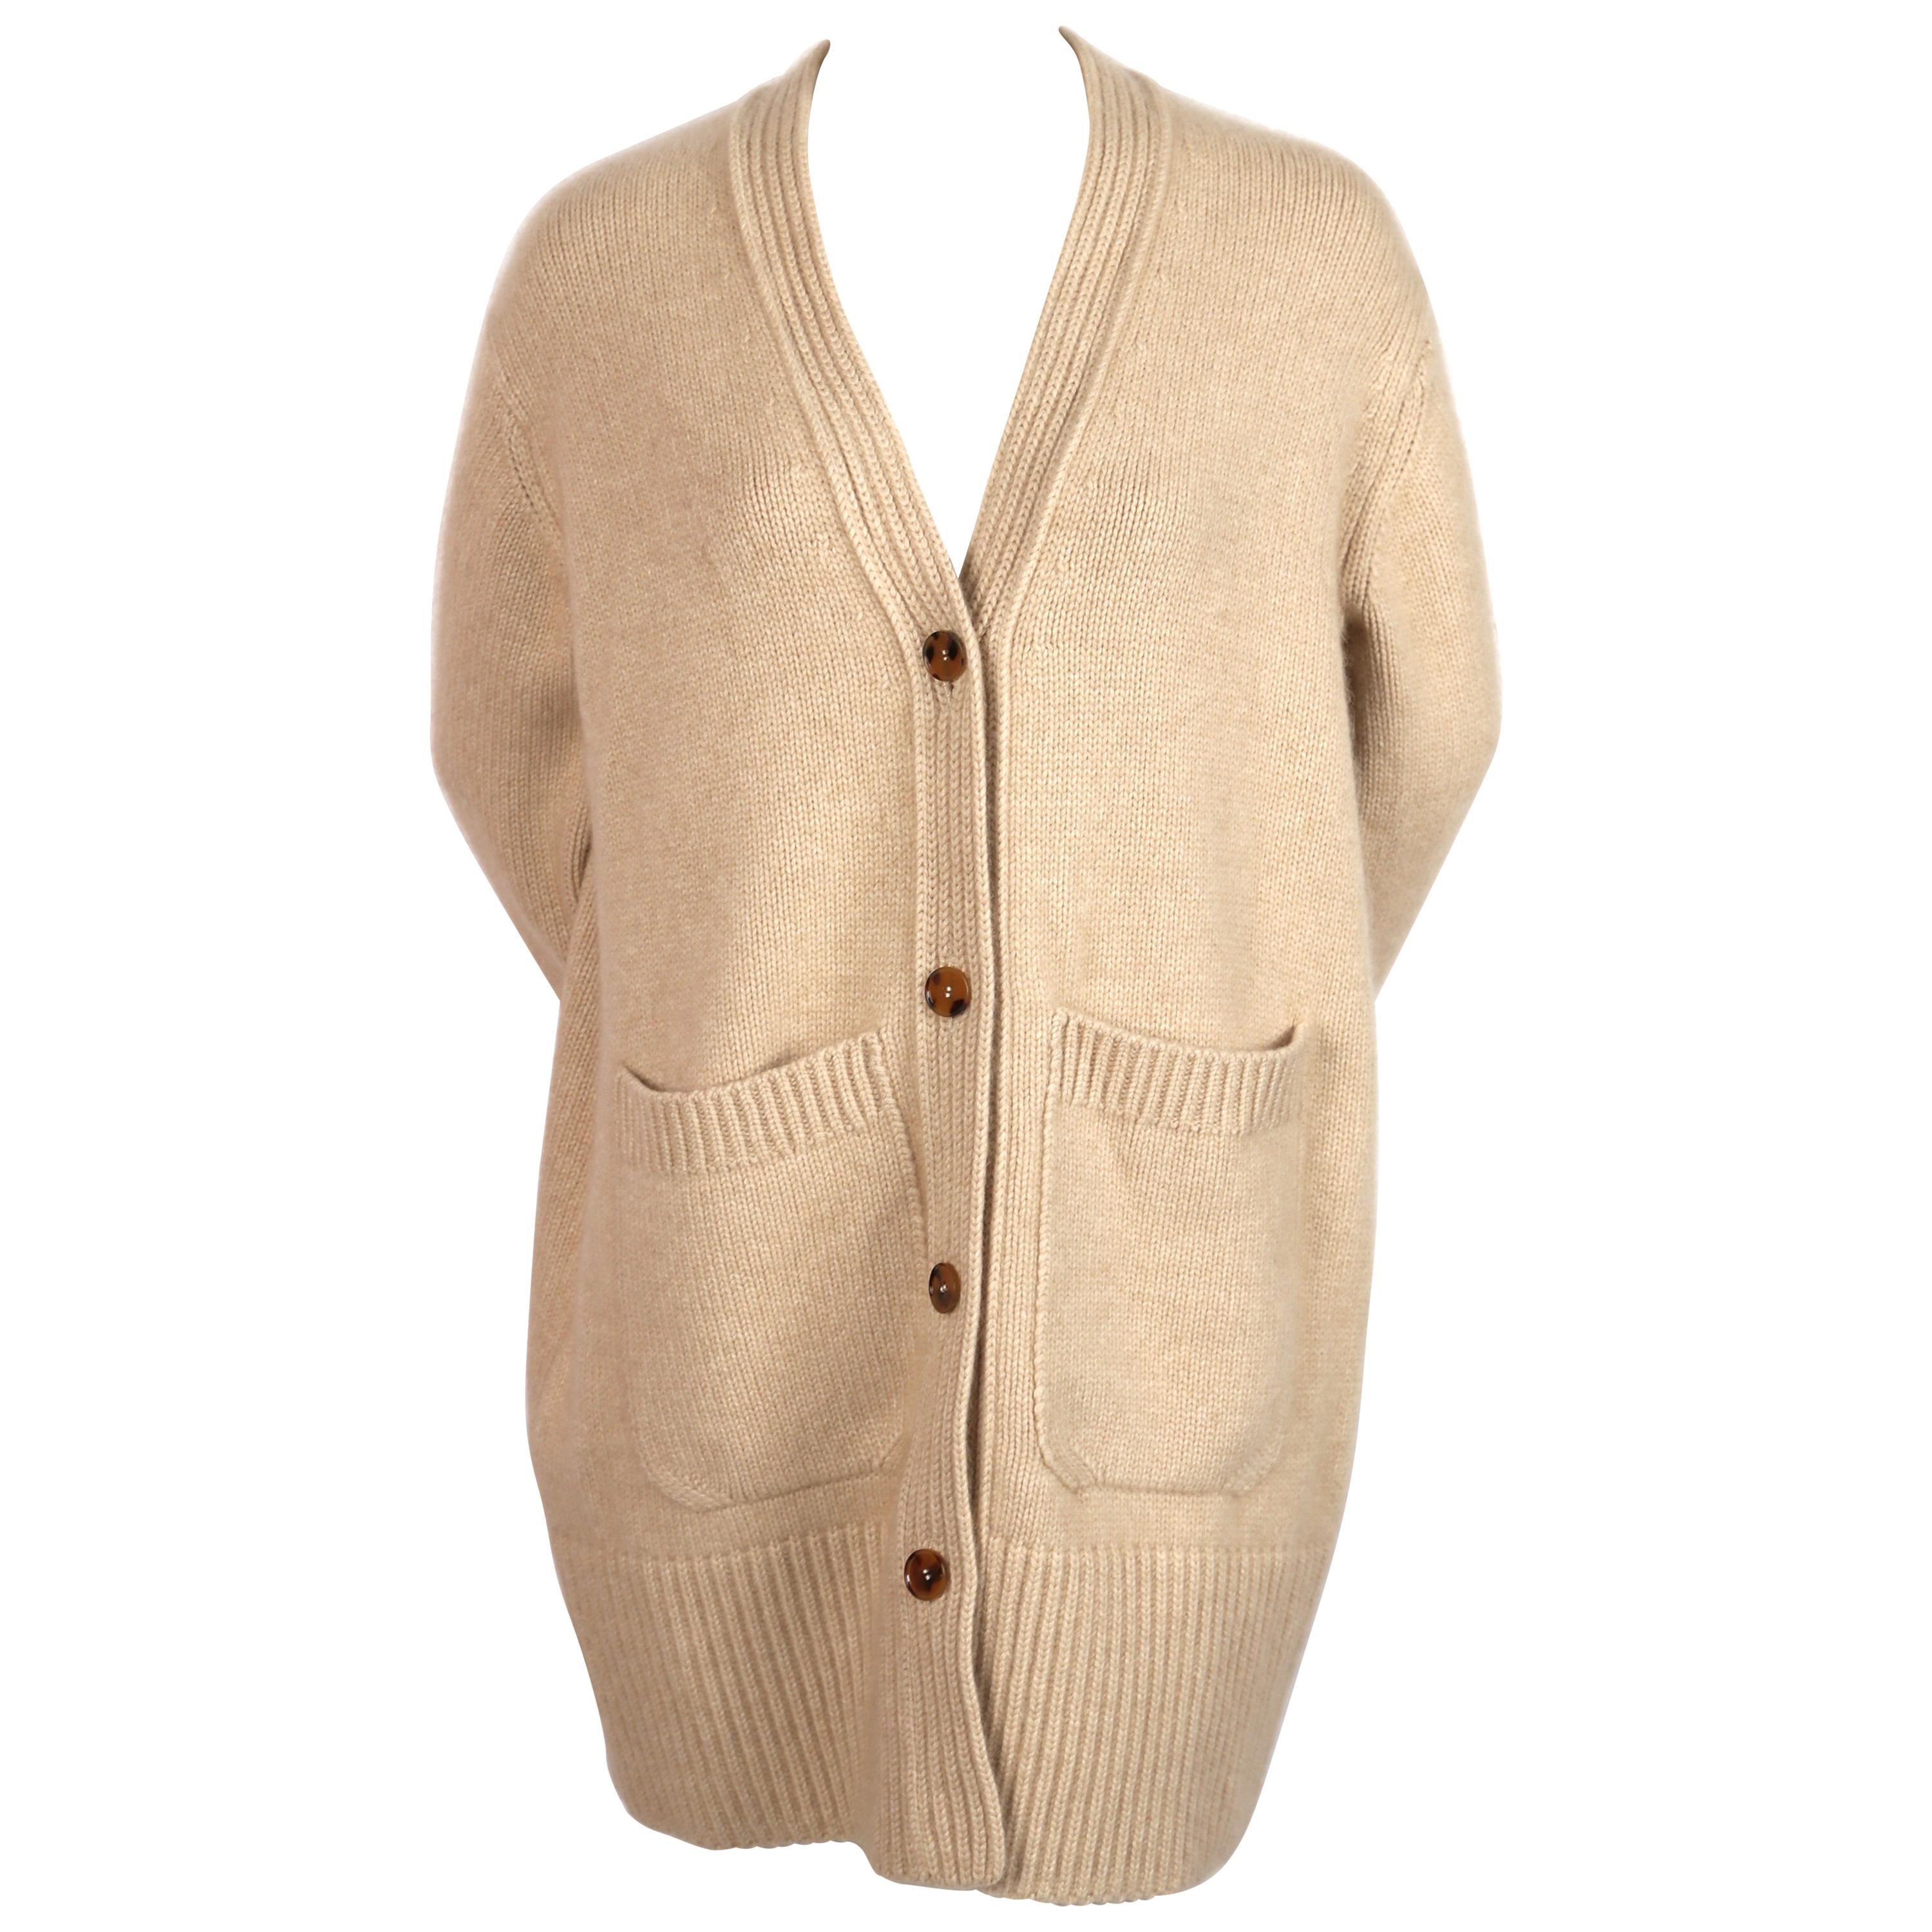 KHAITE 'LUCIA' oversized cashmere cardigan sweater with patch pockets in sand